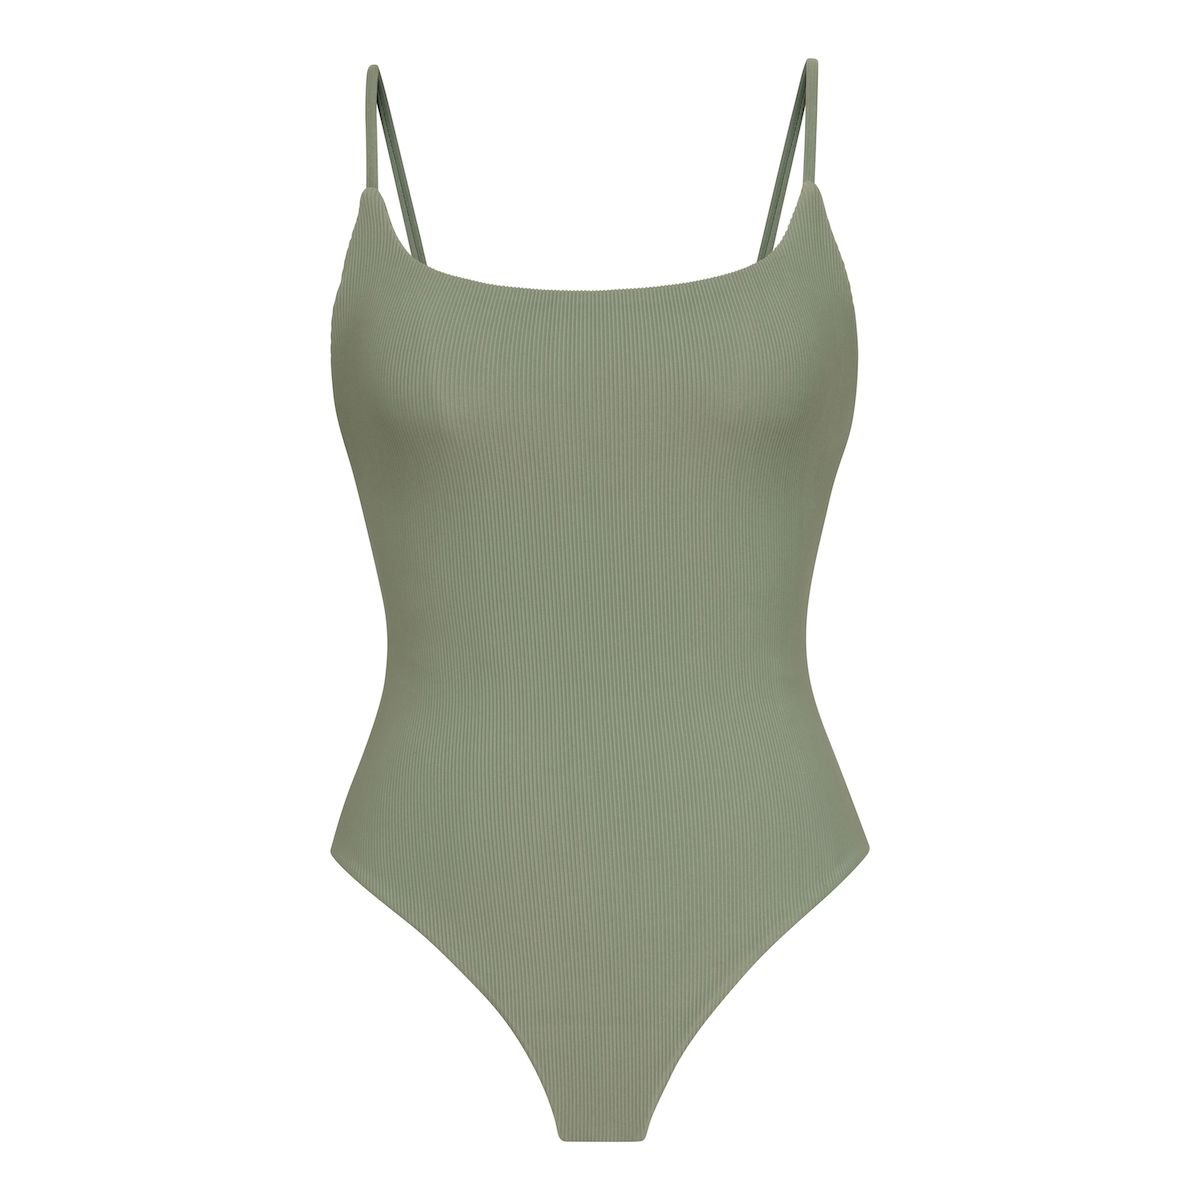 Take a Dip! 12 Best Bathing Suits From Fan-Favorite Sustainable ...